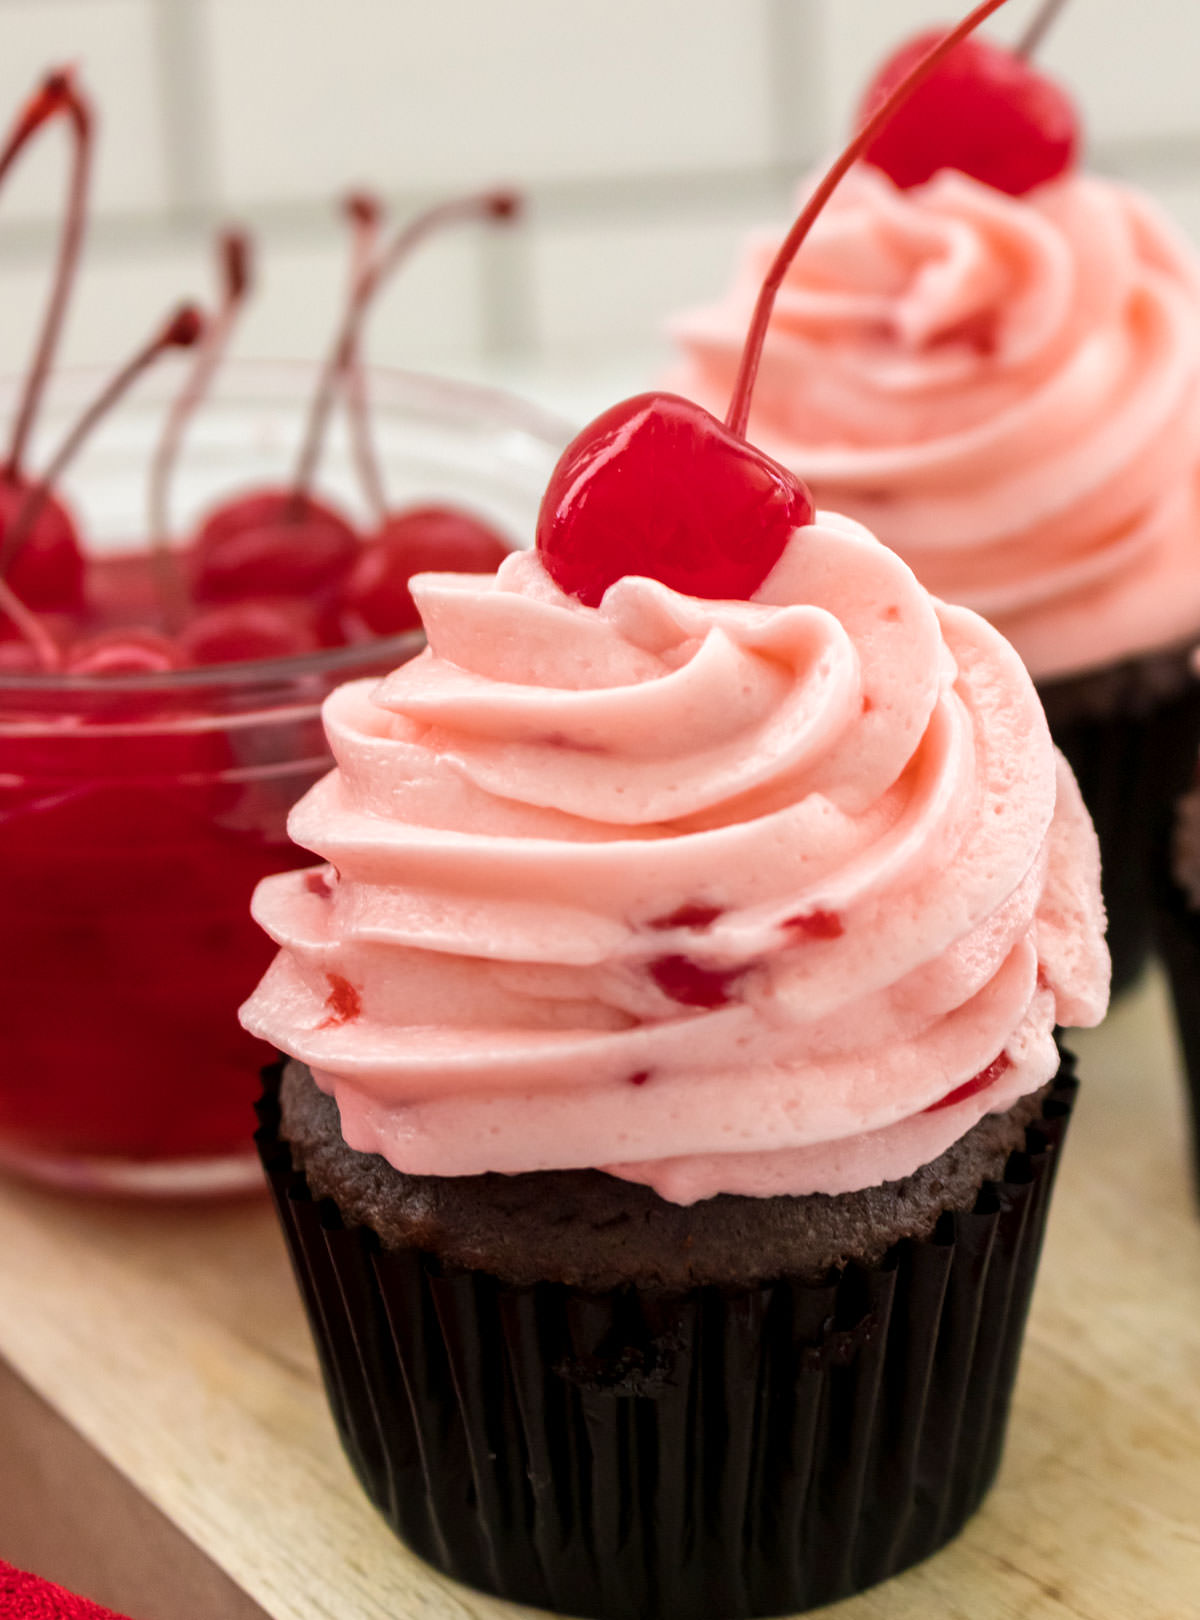 Closeup on a chocolate cupcake topped with The Best Maraschino Cherry Buttercream Frosting sitting next to a glass bowl filled with Maraschino Cherries.